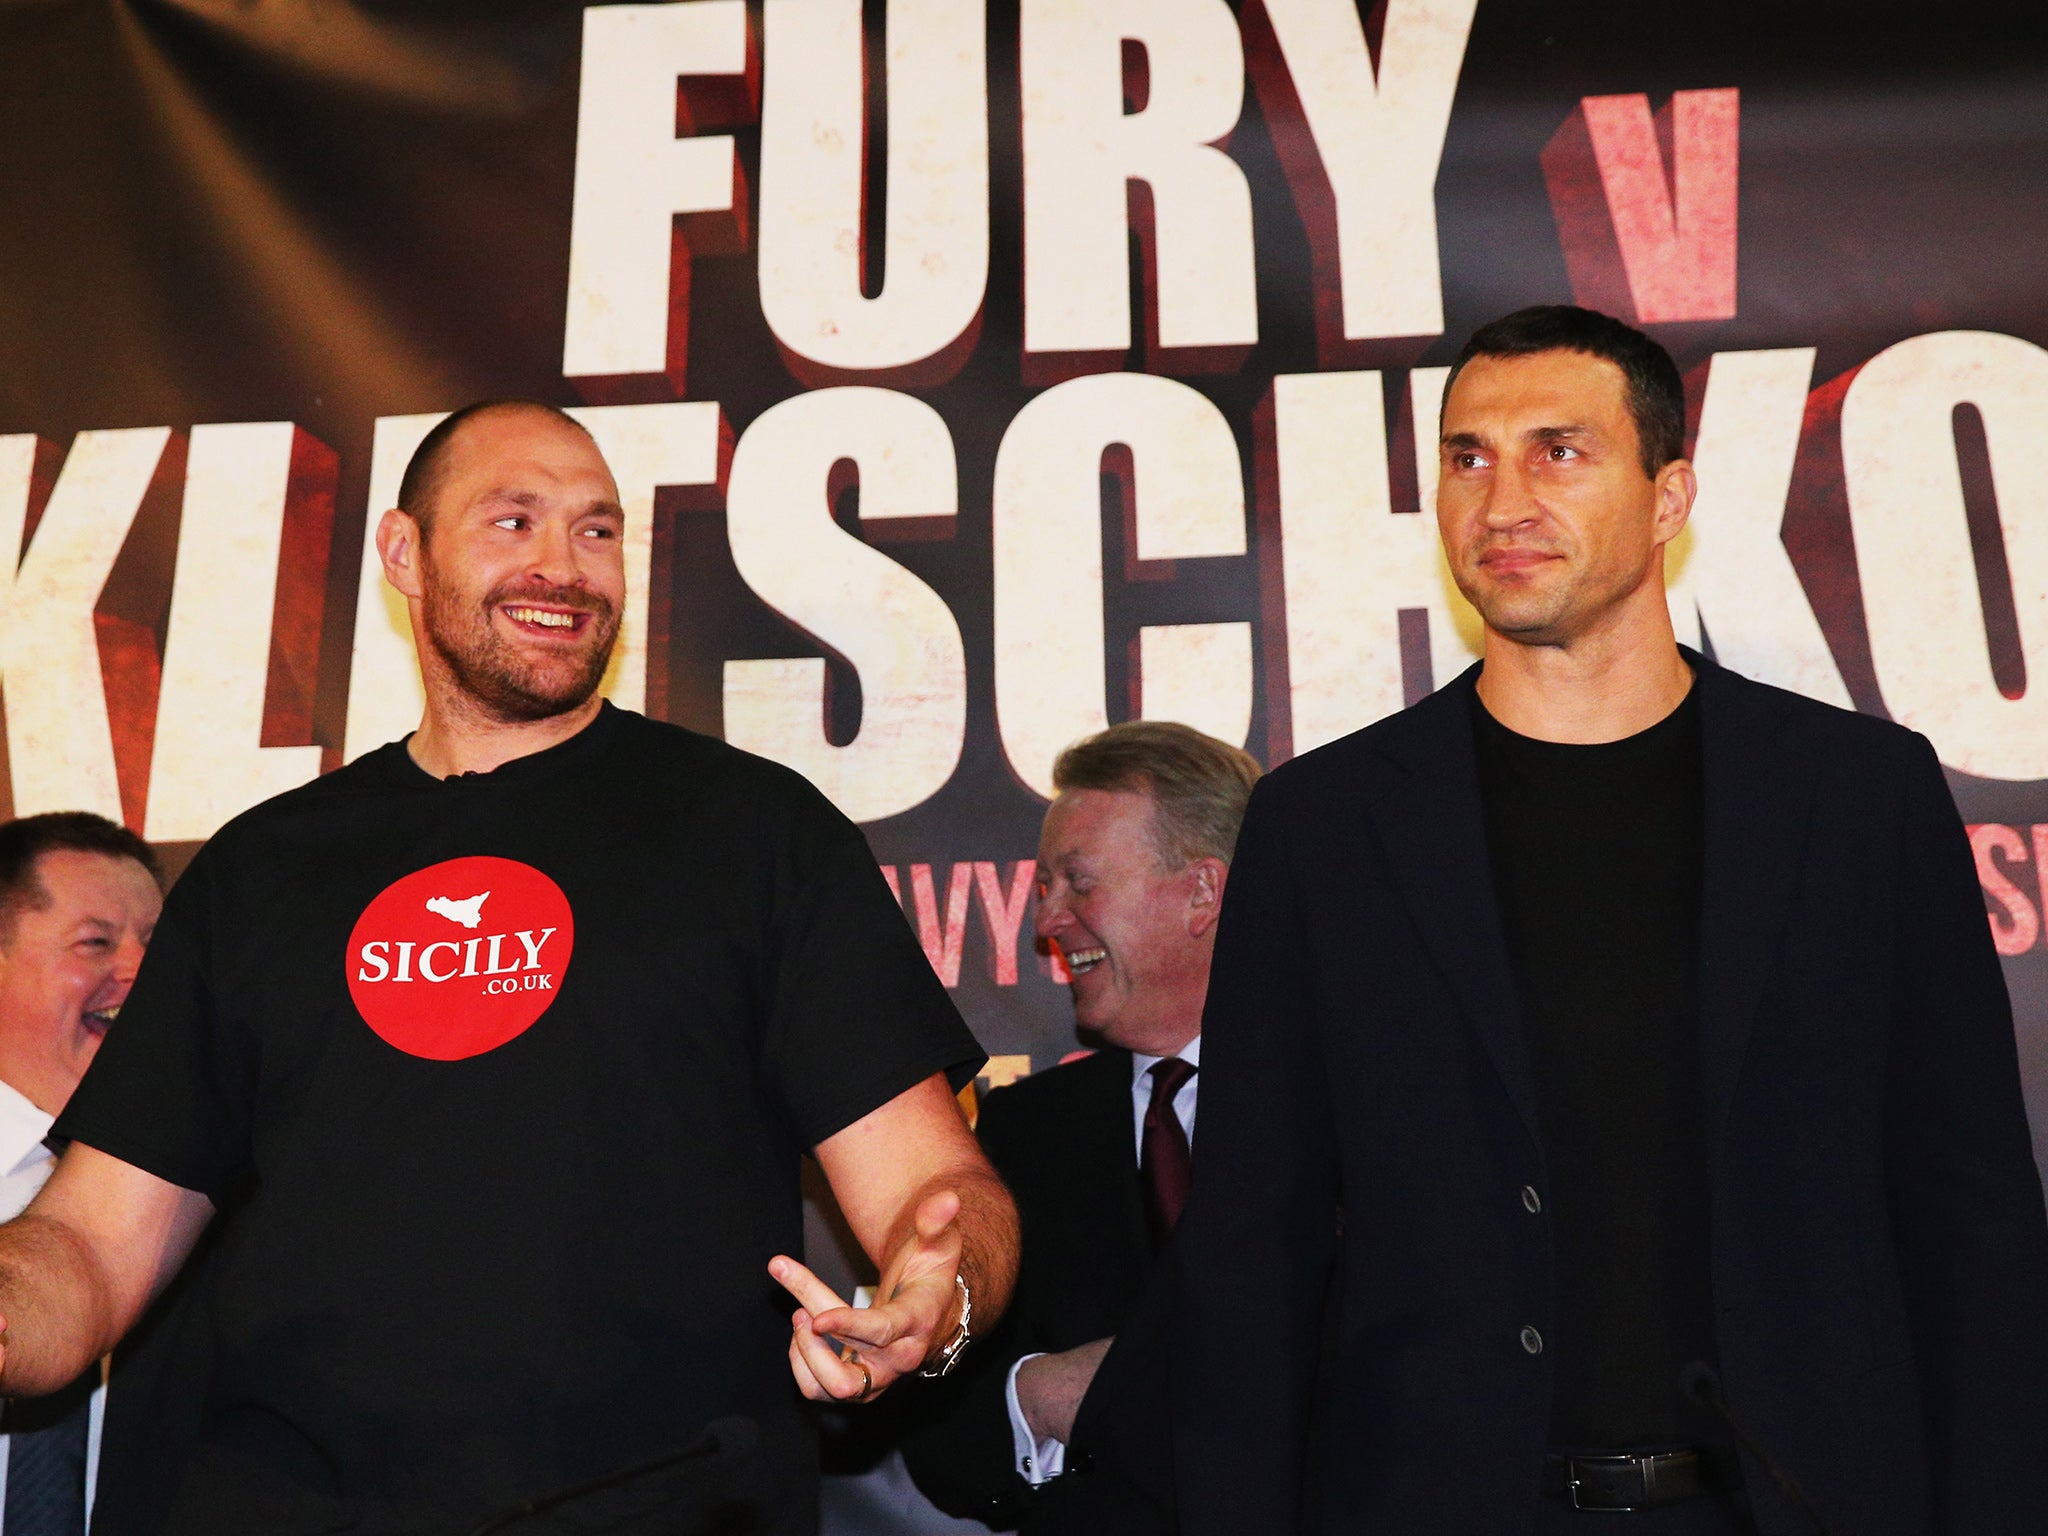 Tyson Fury was all smiles during today's press conference with Wladimir Klitschko